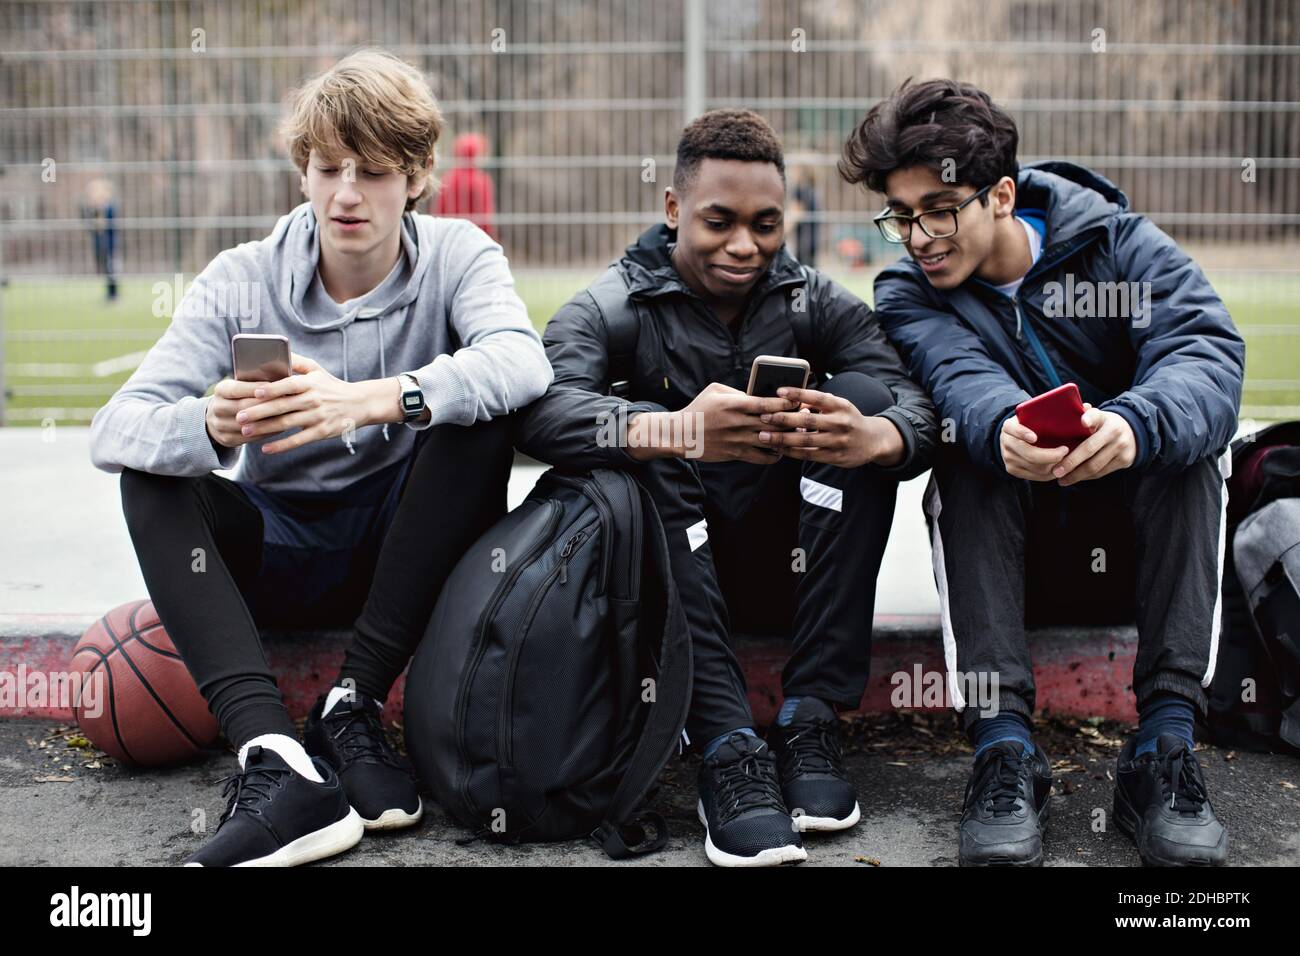 Social media addicted friends using mobile phones while sitting on sidewalk after basketball practice in city Stock Photo